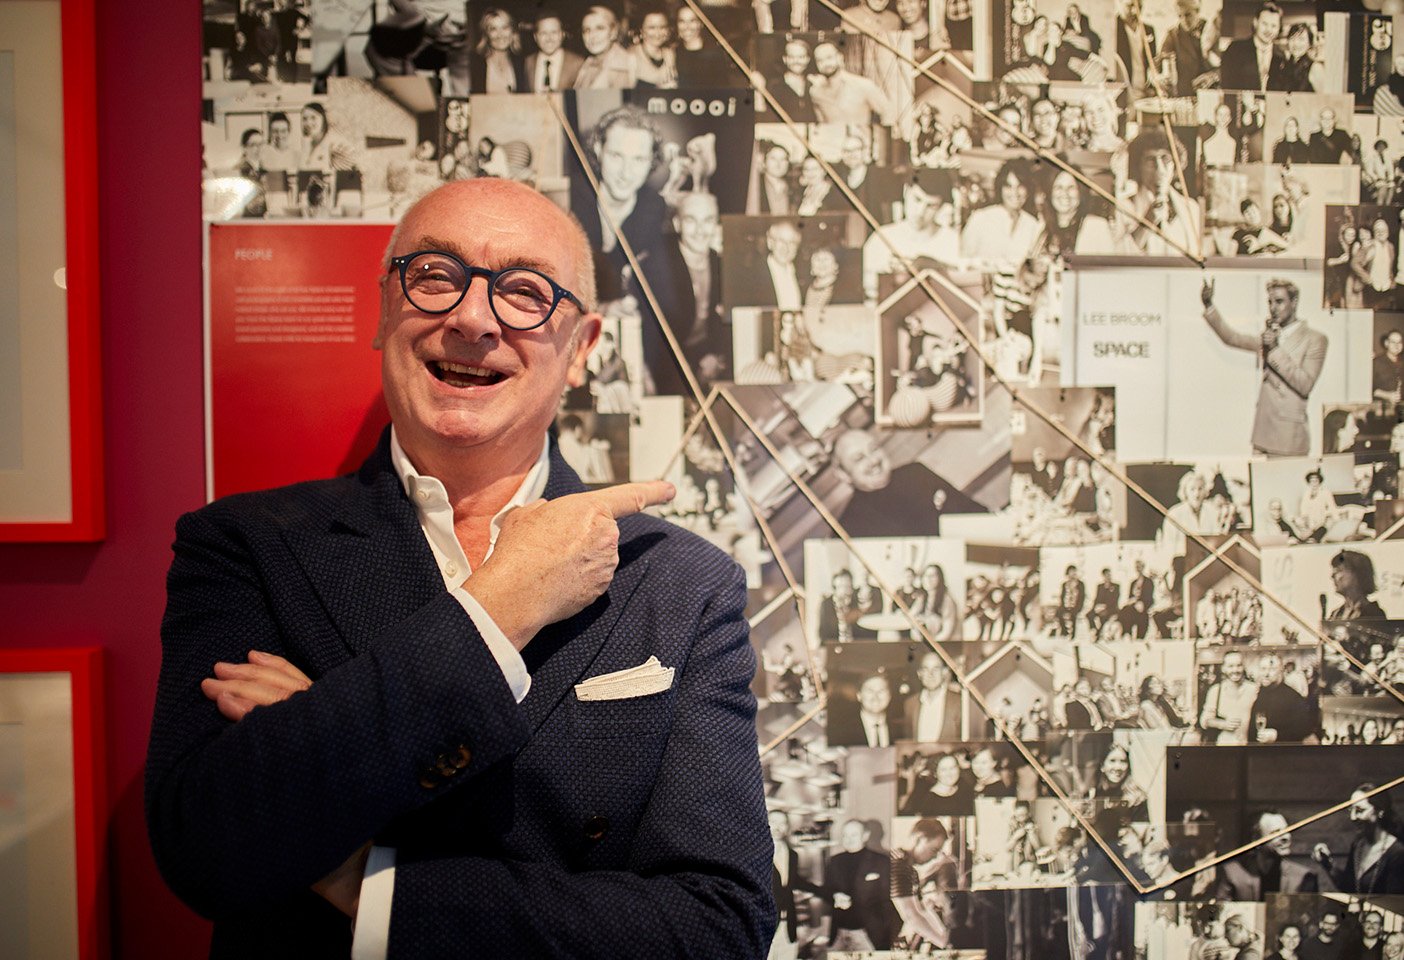 Piero Lissoni at the Space 30th birthday party in Melbourne, finding himself on the photo wall that featured Space's design guests over the past three decades. Photo c/o Space.